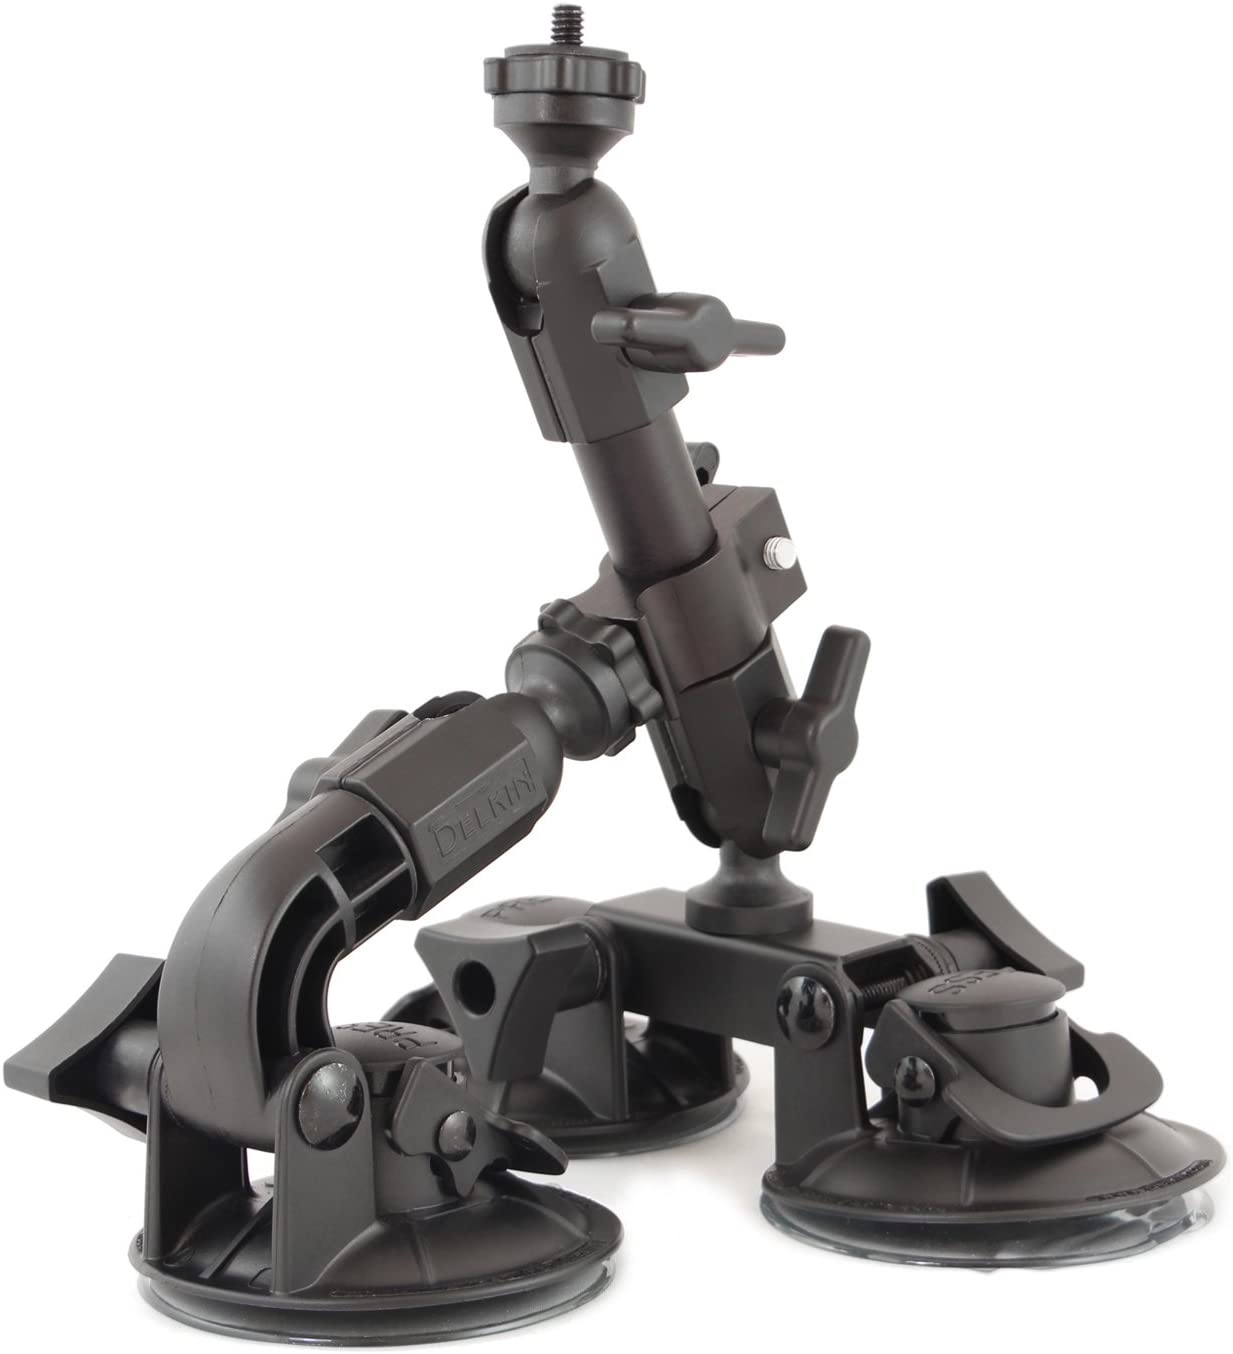 Delkin Devices Fat Gecko Triple Suction Camera Mount - Amazon Prime - Lowest Price Ever $39.99